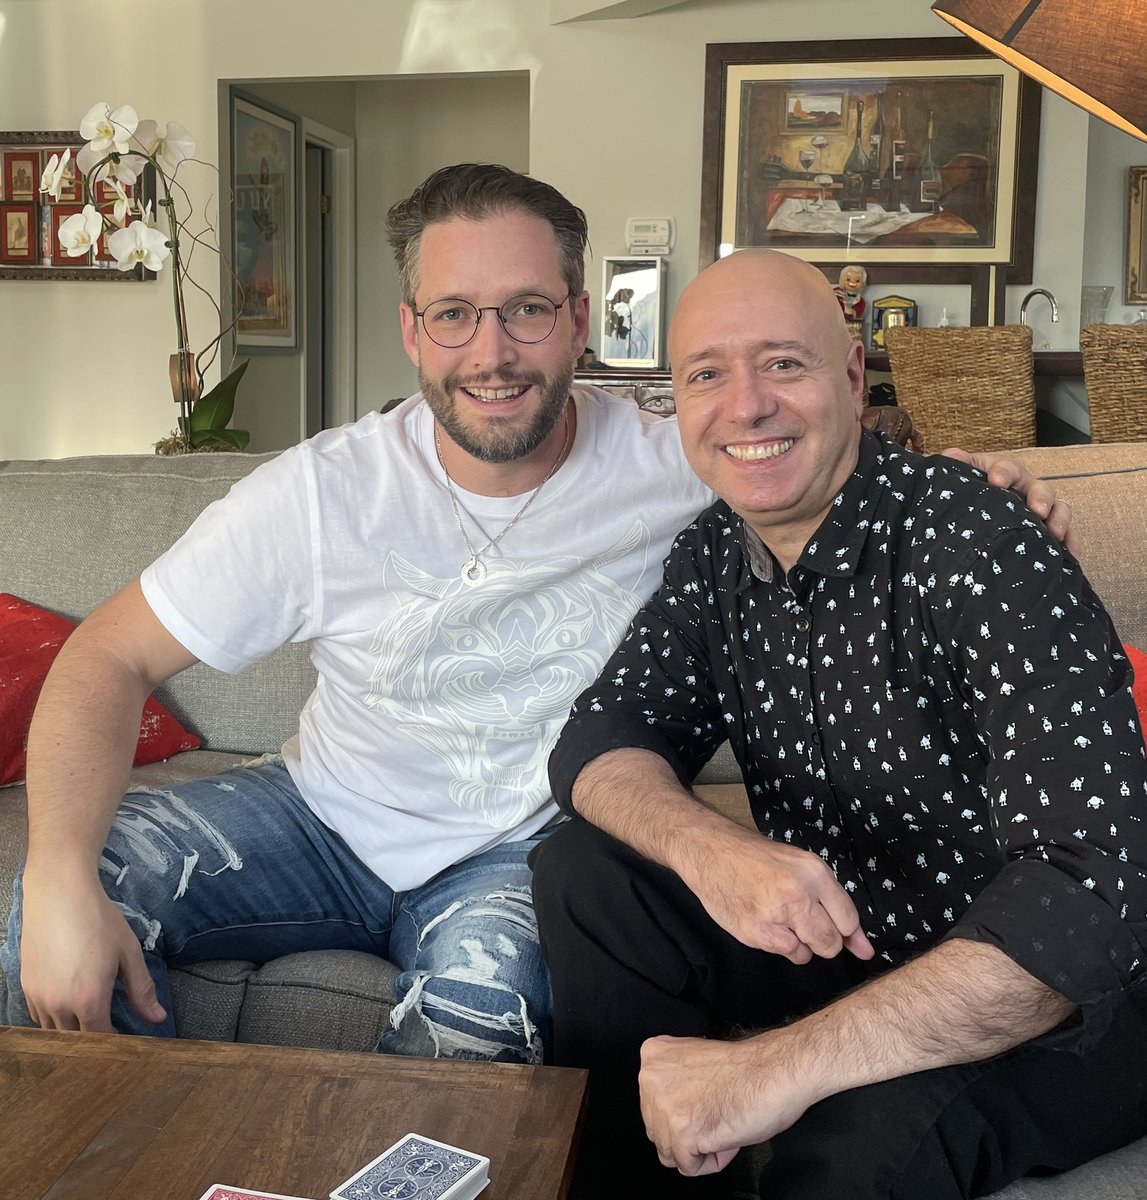 Spent the afternoon with Wall Street Bets founder Jamie Rogozinski. Such a fun and educational day. Who knew that he was into magic. Thanx to Roger Dreyer for putting it together. @MeirYedid @wallstreetbets https://t.co/qxb2A7BTOB